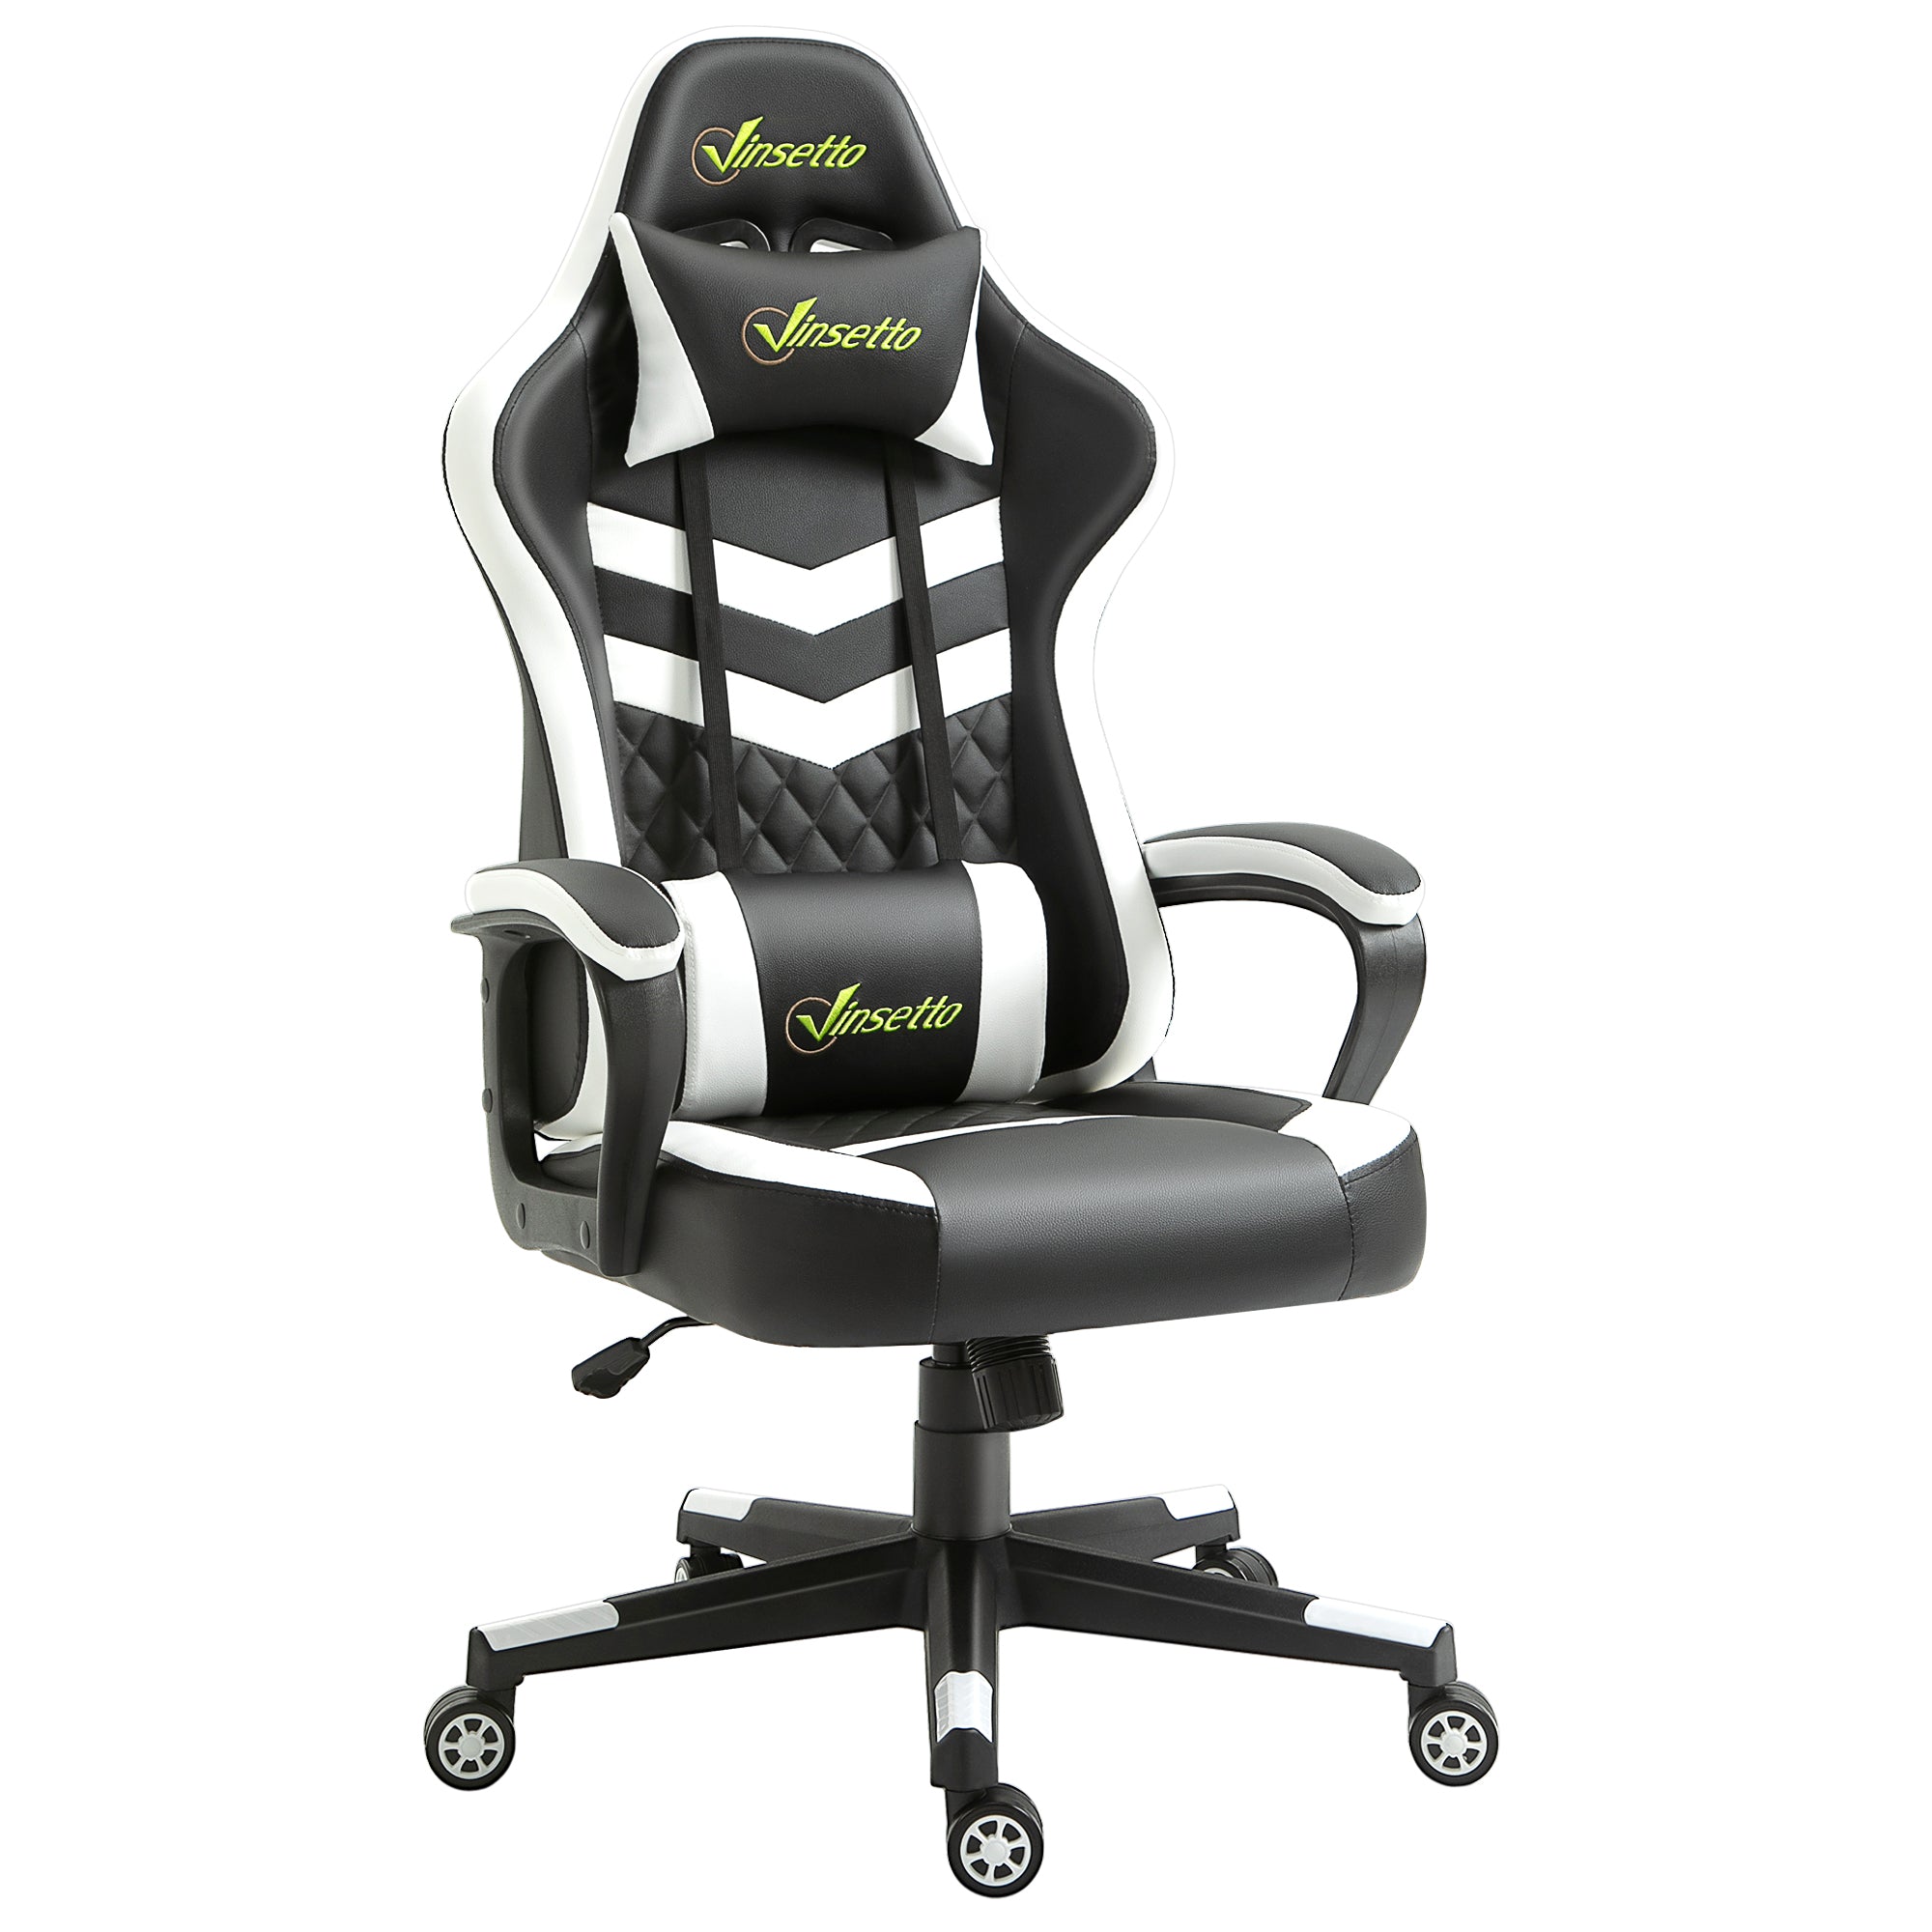 Vinsetto Racing Gaming Chair w/ Lumbar Support - Gamer Office Chair - Black White  | TJ Hughes